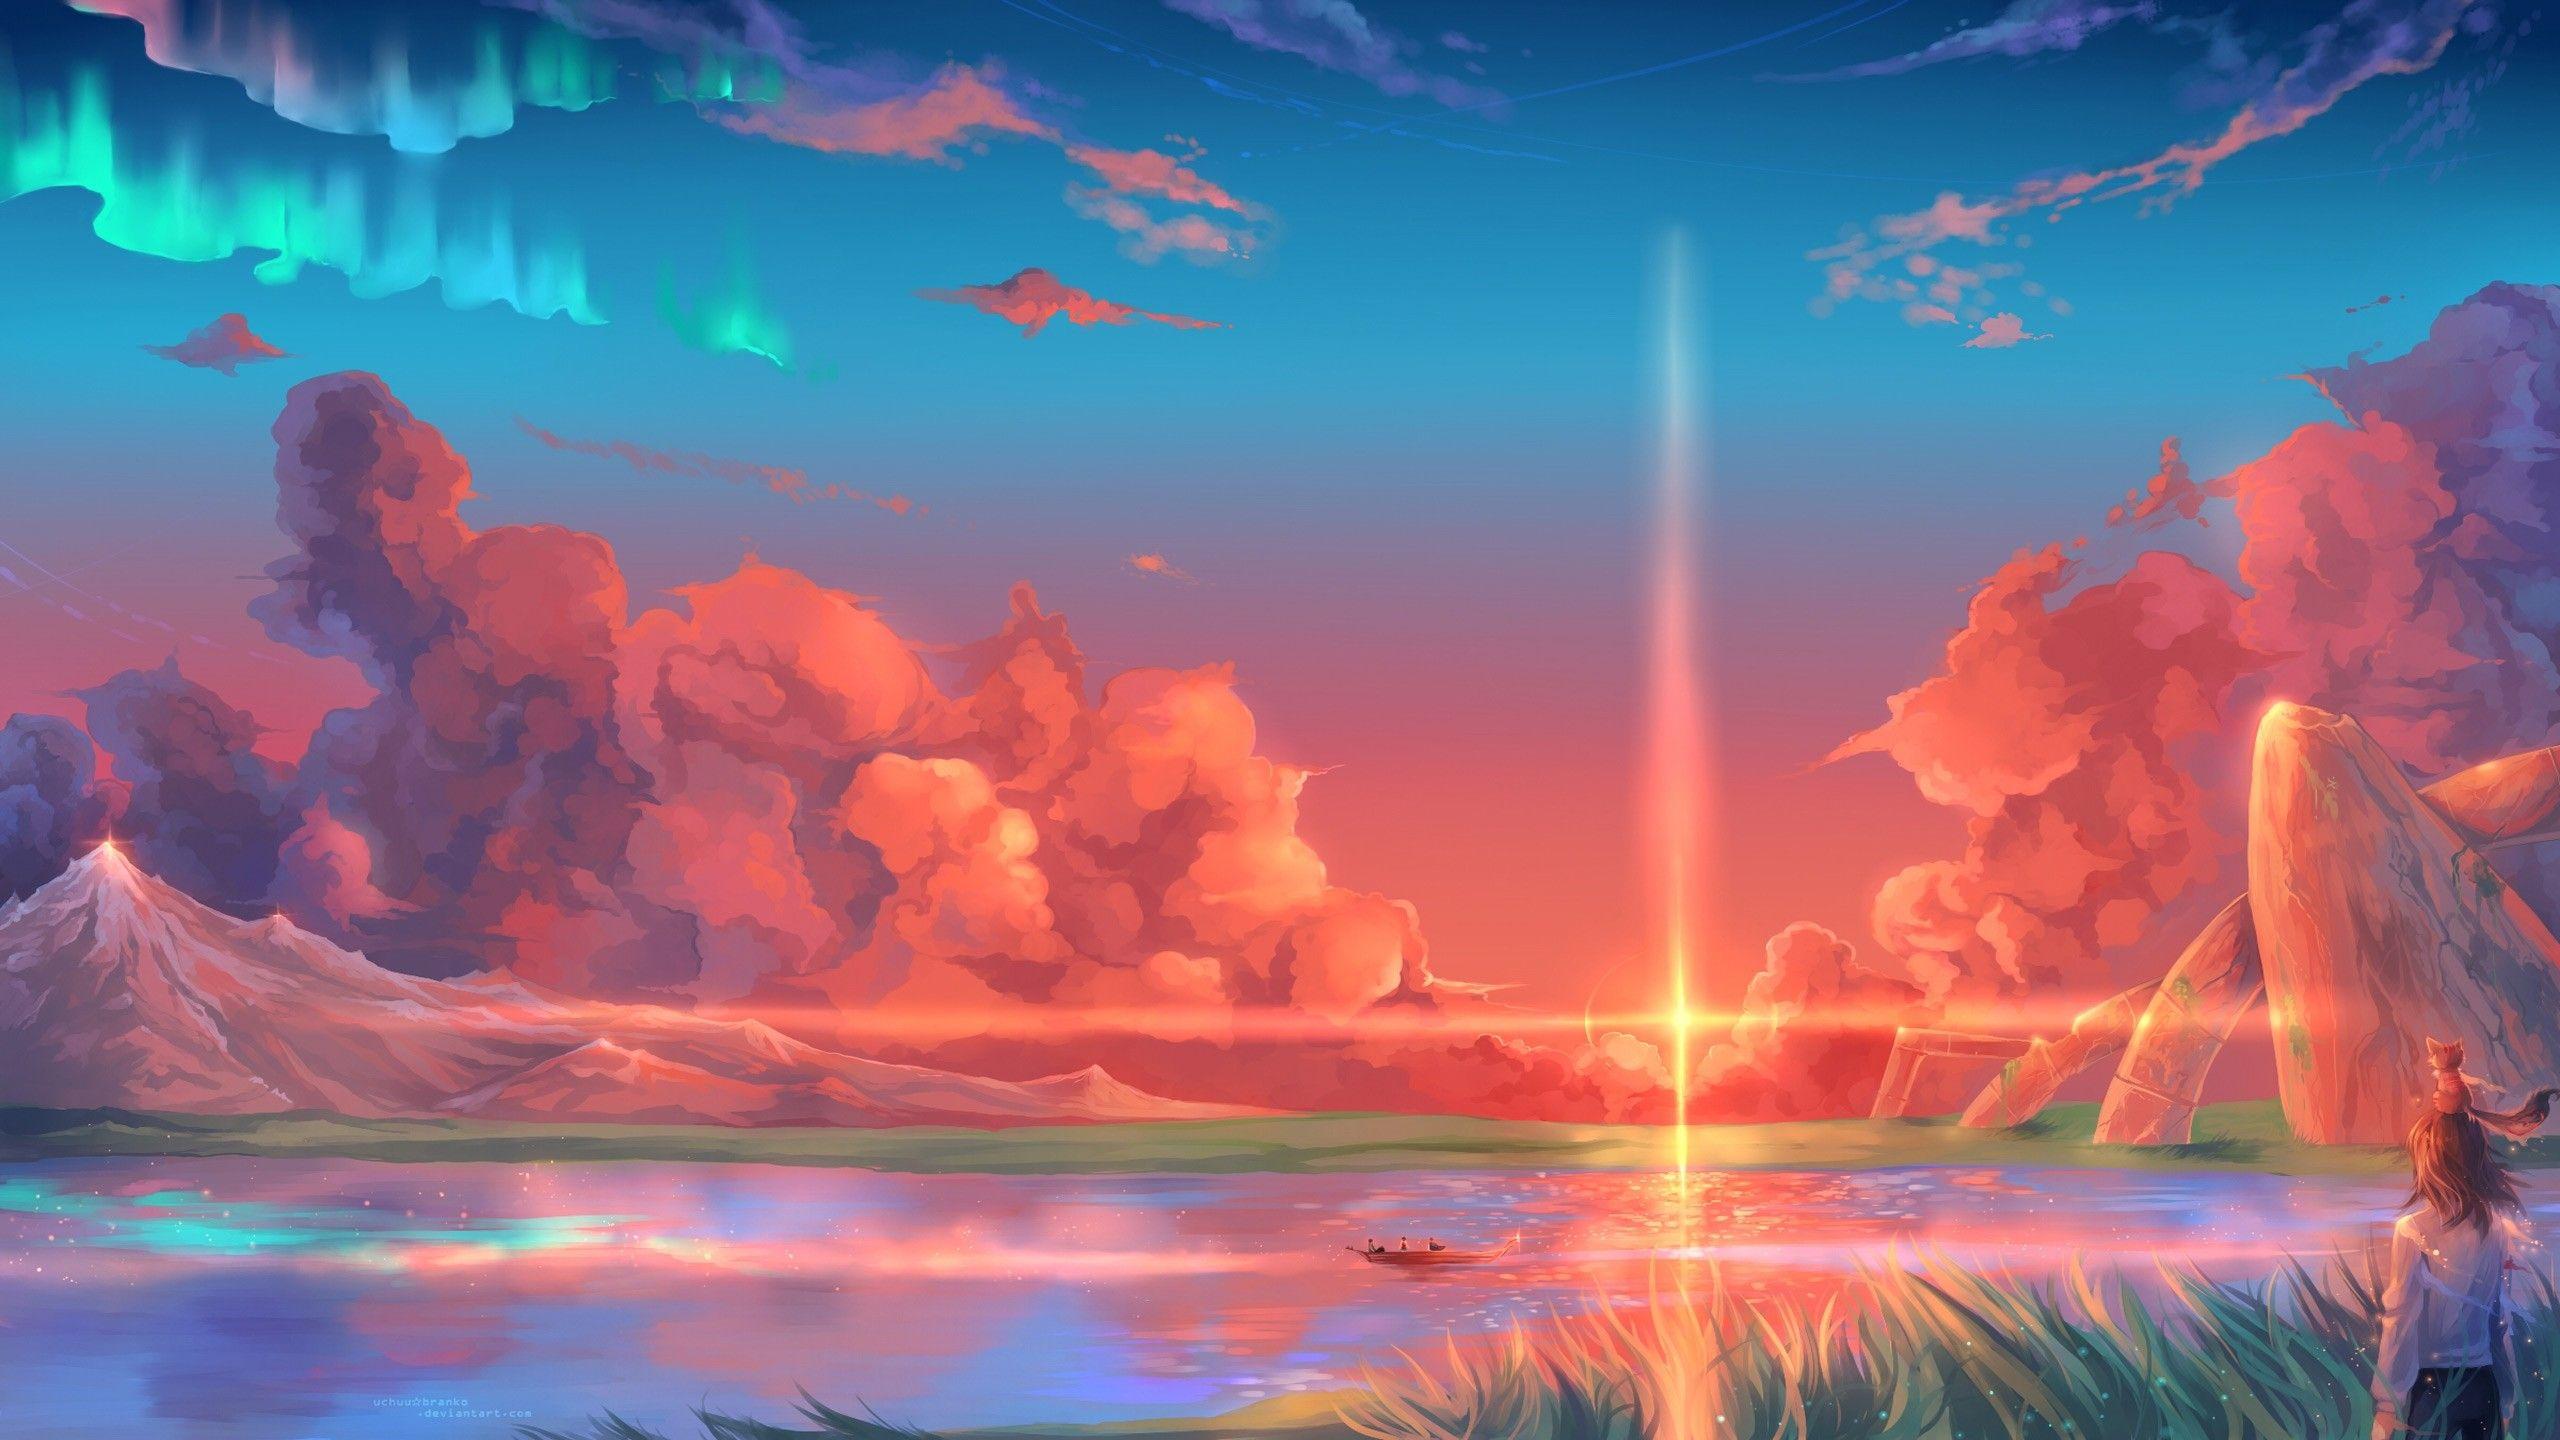 Res: 2560x1440, New Anime Fantasy Wallpapers Desktop Gallery